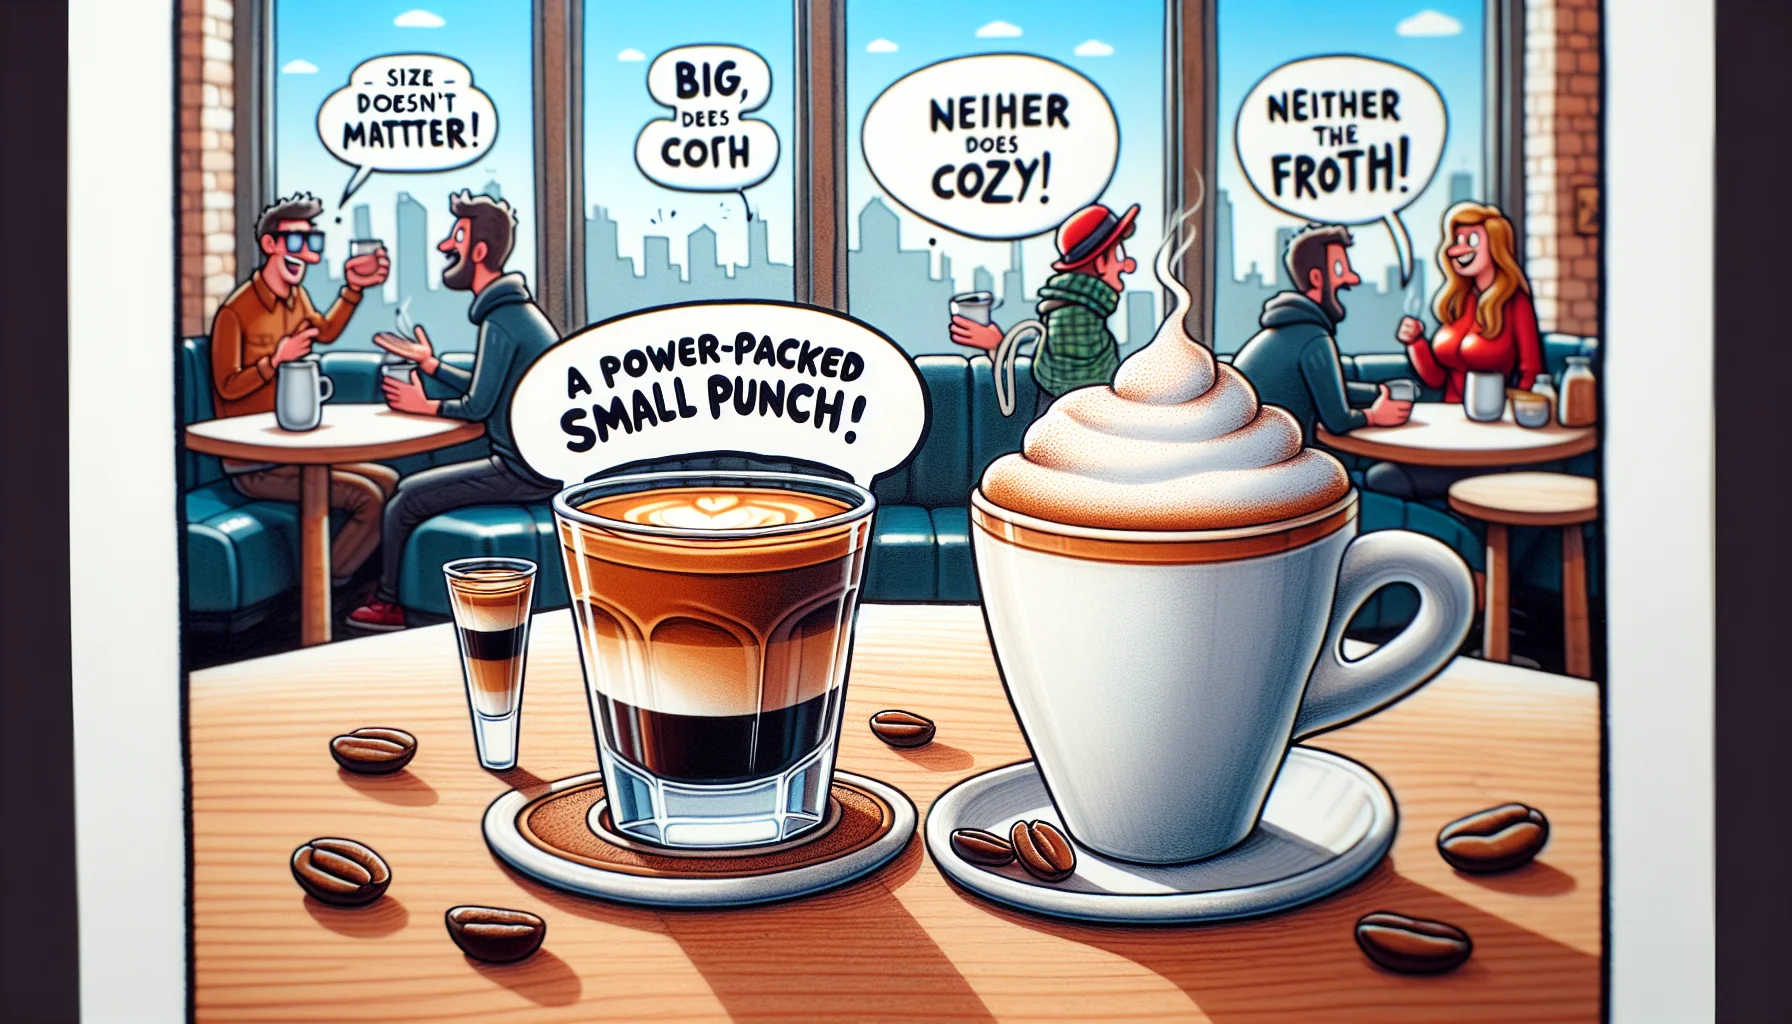 Create a humorous, realistic scenario illustrating the comparison between a cortado and a cappuccino. On the left side, depict a cortado coffee - a small transparent glass filled with equal layers of espresso and warm milk, the glass should be on a tiny coaster with a cheeky tag saying 'A power-packed small punch'. On the right side, draw a cappuccino - a large white porcelain cup filled with 1/3 espresso, 1/3 warm milk and 1/3 frothed milk, along with a playful tag saying 'Big, frothy and cozy!' Both drinks sit on a table with two cartoonish speech bubbles depicting an amusing chat between them. The cortado says, 'Size doesn't matter!' and the cappuccino responds, 'Neither does the froth!'. In the background visualize a stylish cafe atmosphere enticing people to enjoy their beverages.